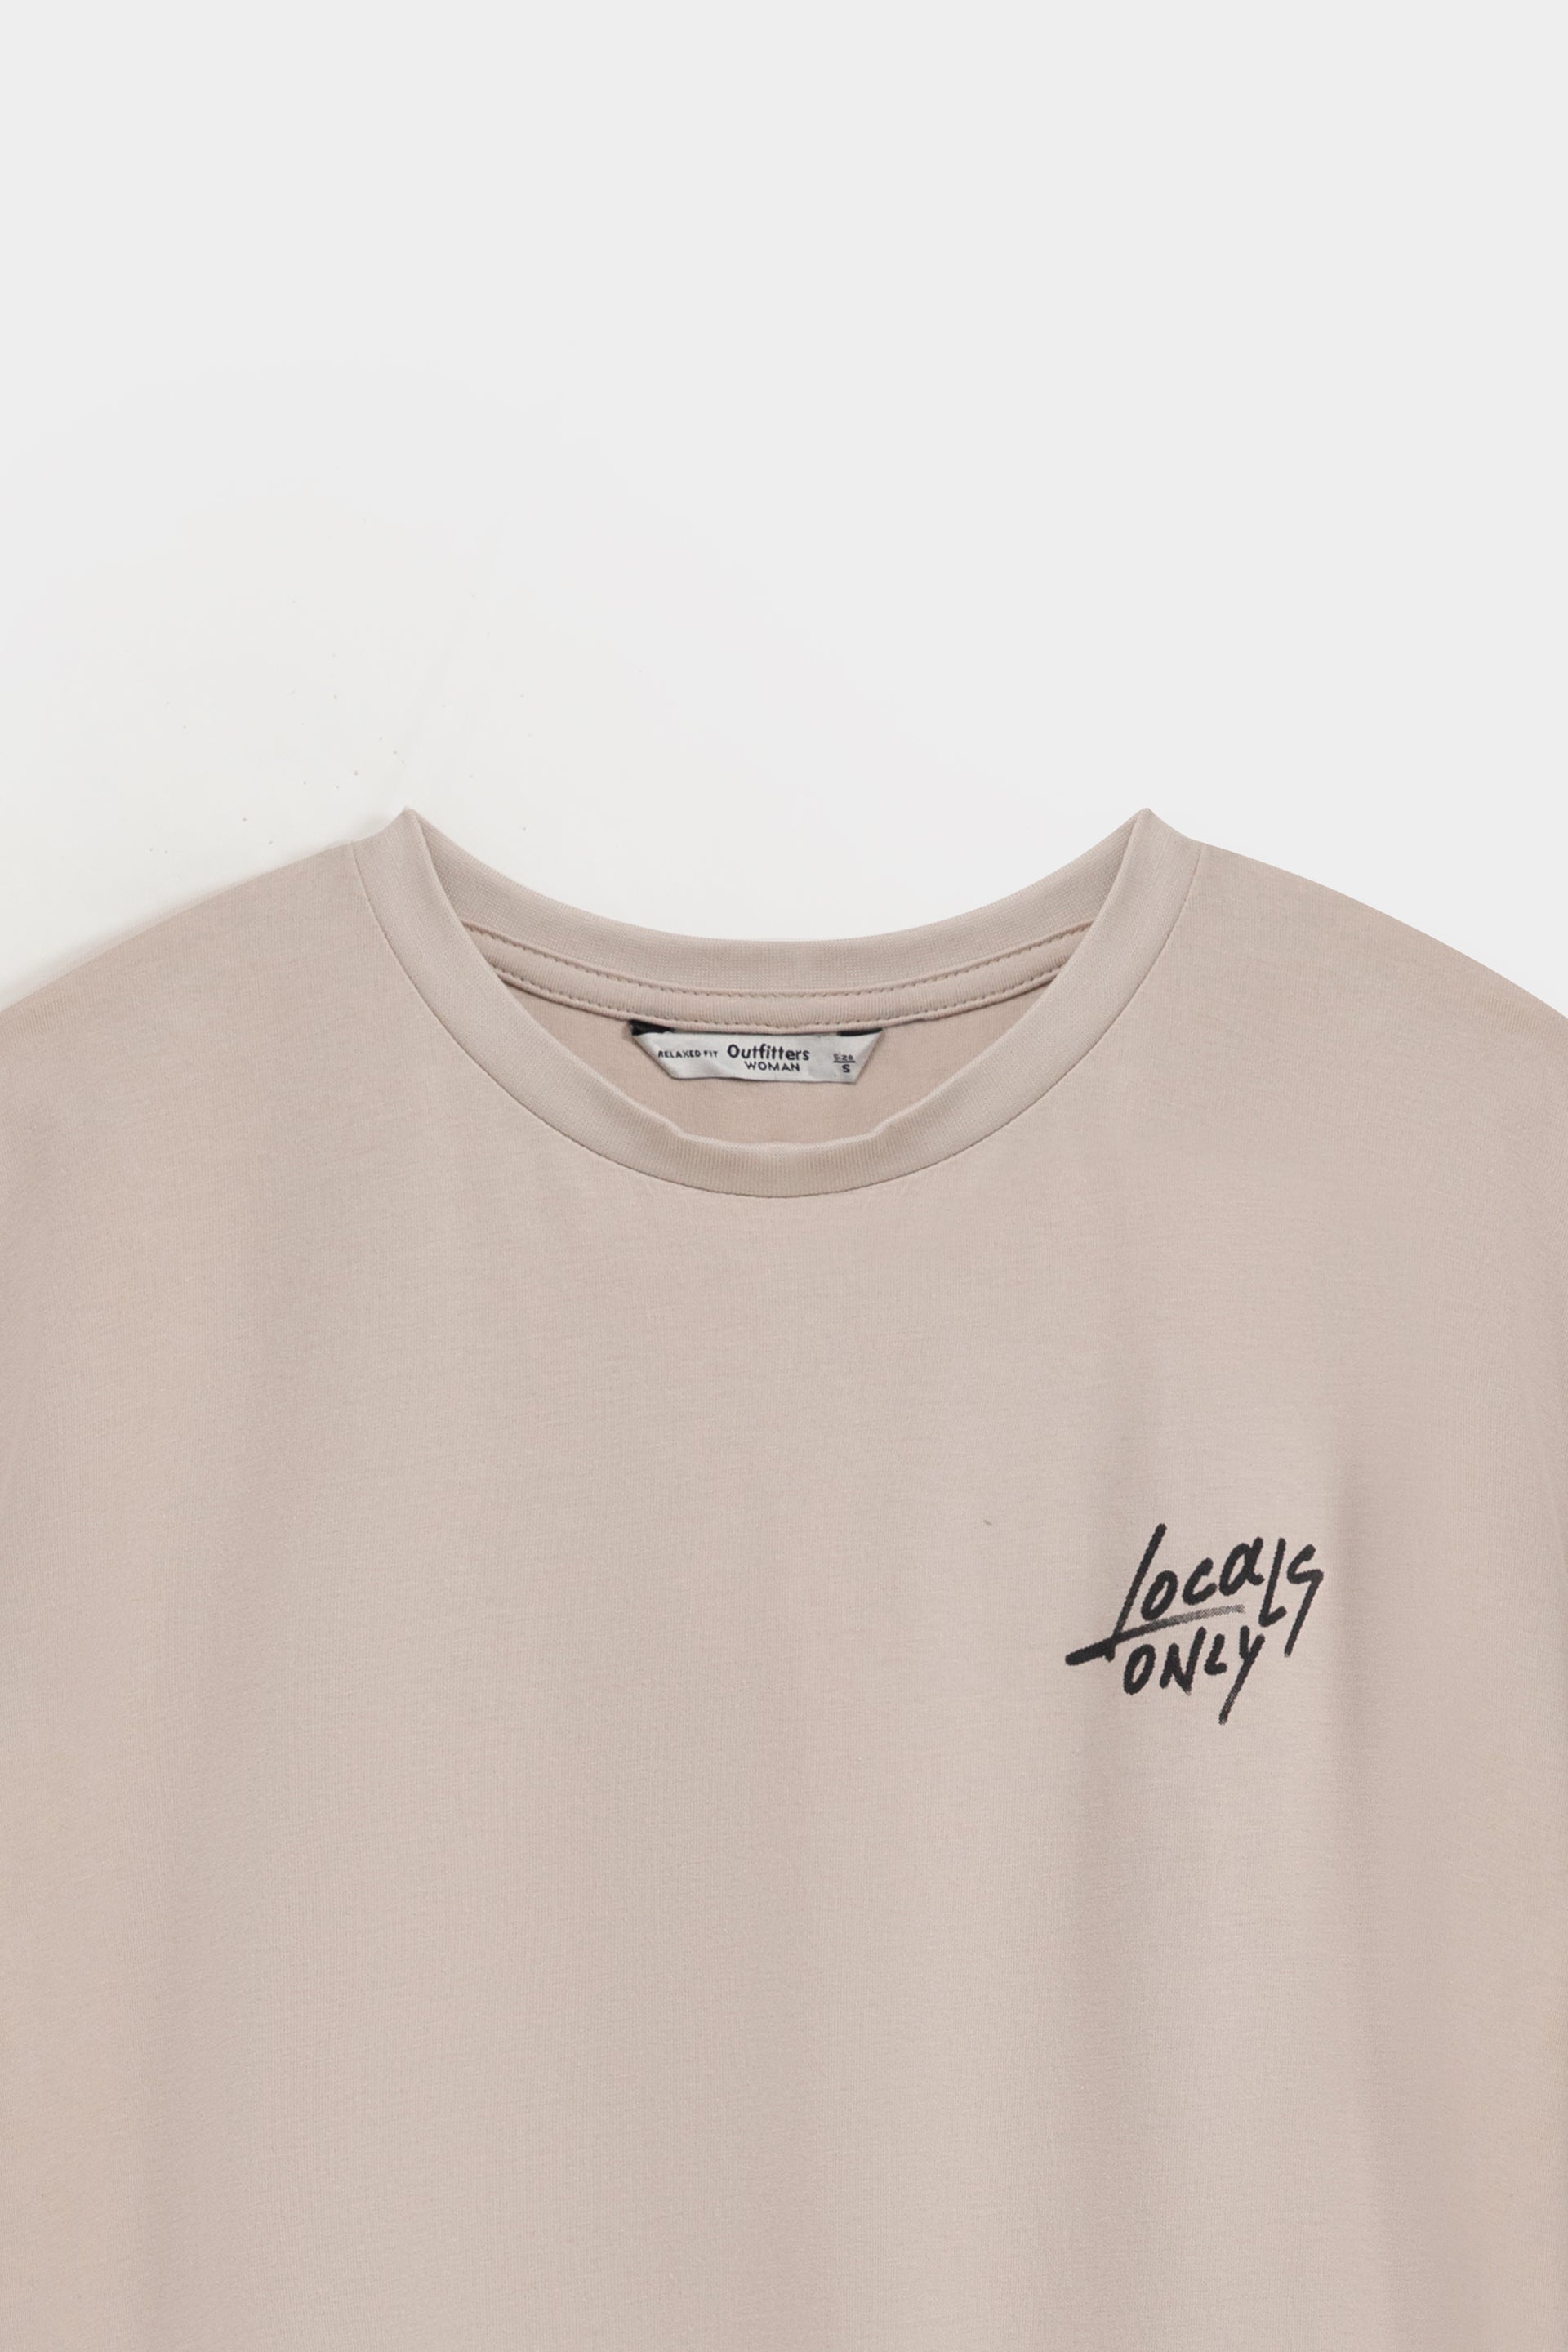 Locals Only Graphic T-shirt